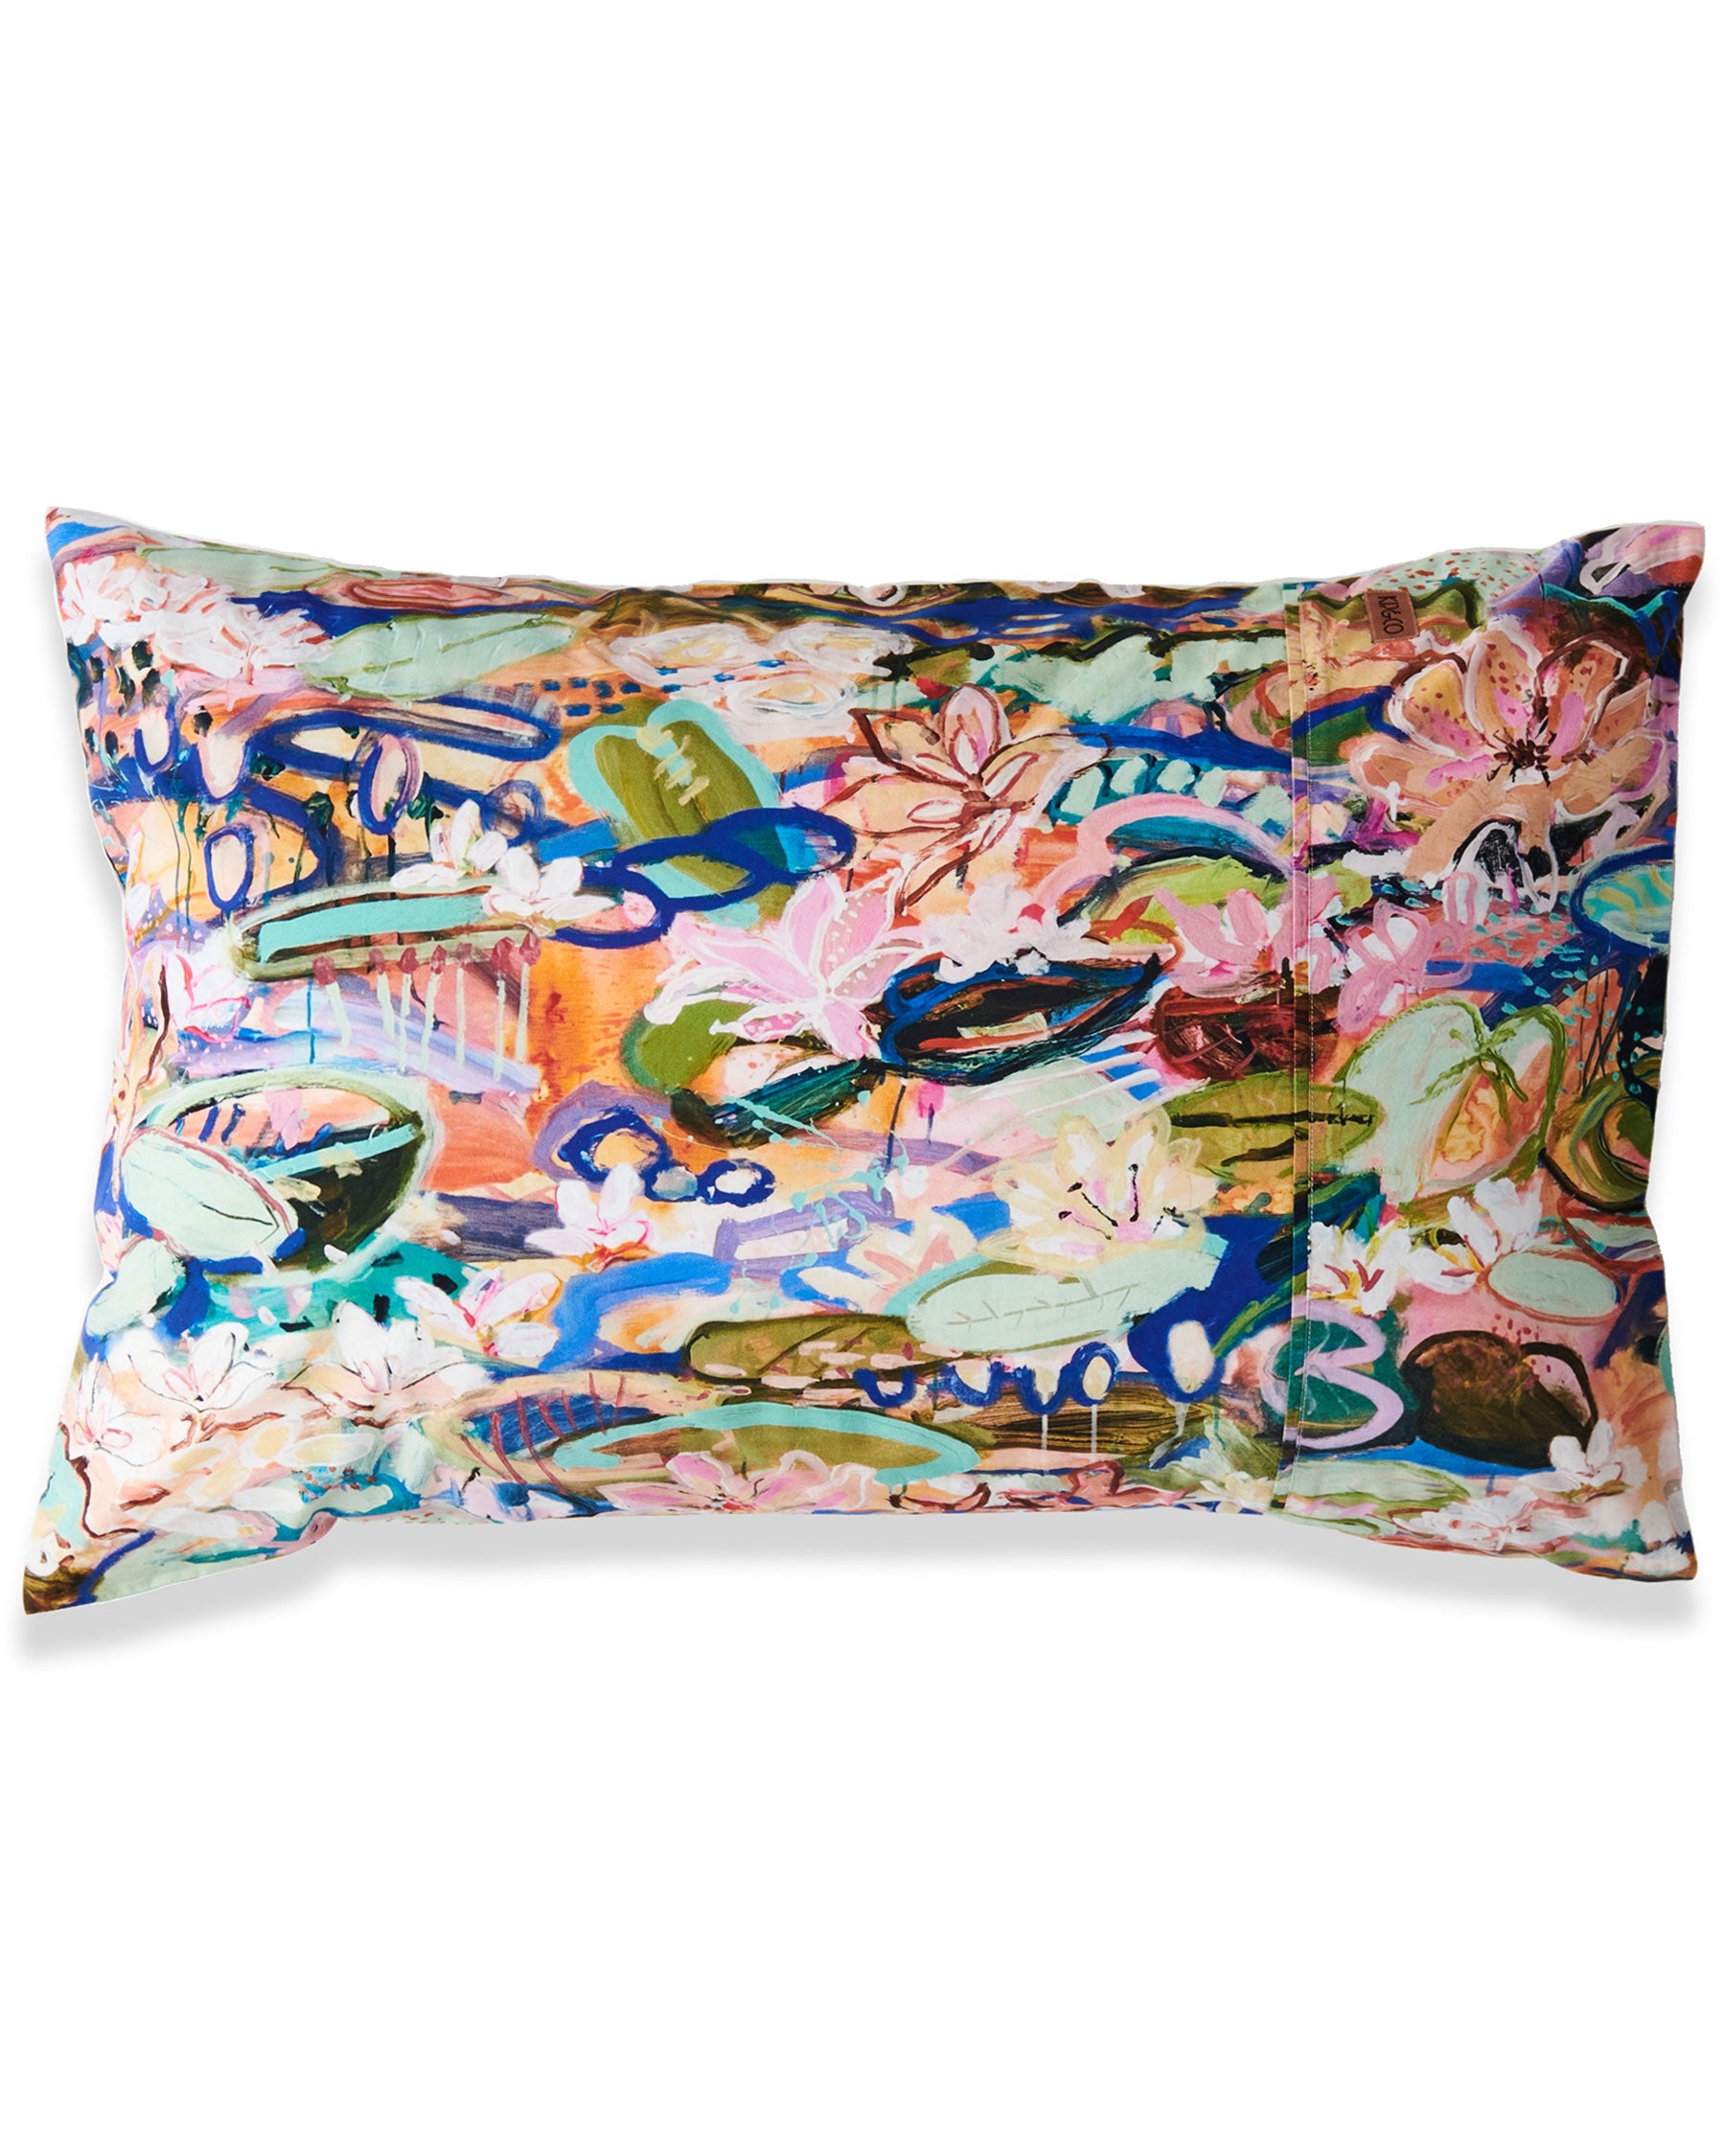 The Kip&Co x Kezz Brett Waterlily Waterway Organic Cotton Pillowcases feature a stunning painterly scene of water lilies and other pond blooming plants with layers of superb details in a spectrum of cool tone colours.